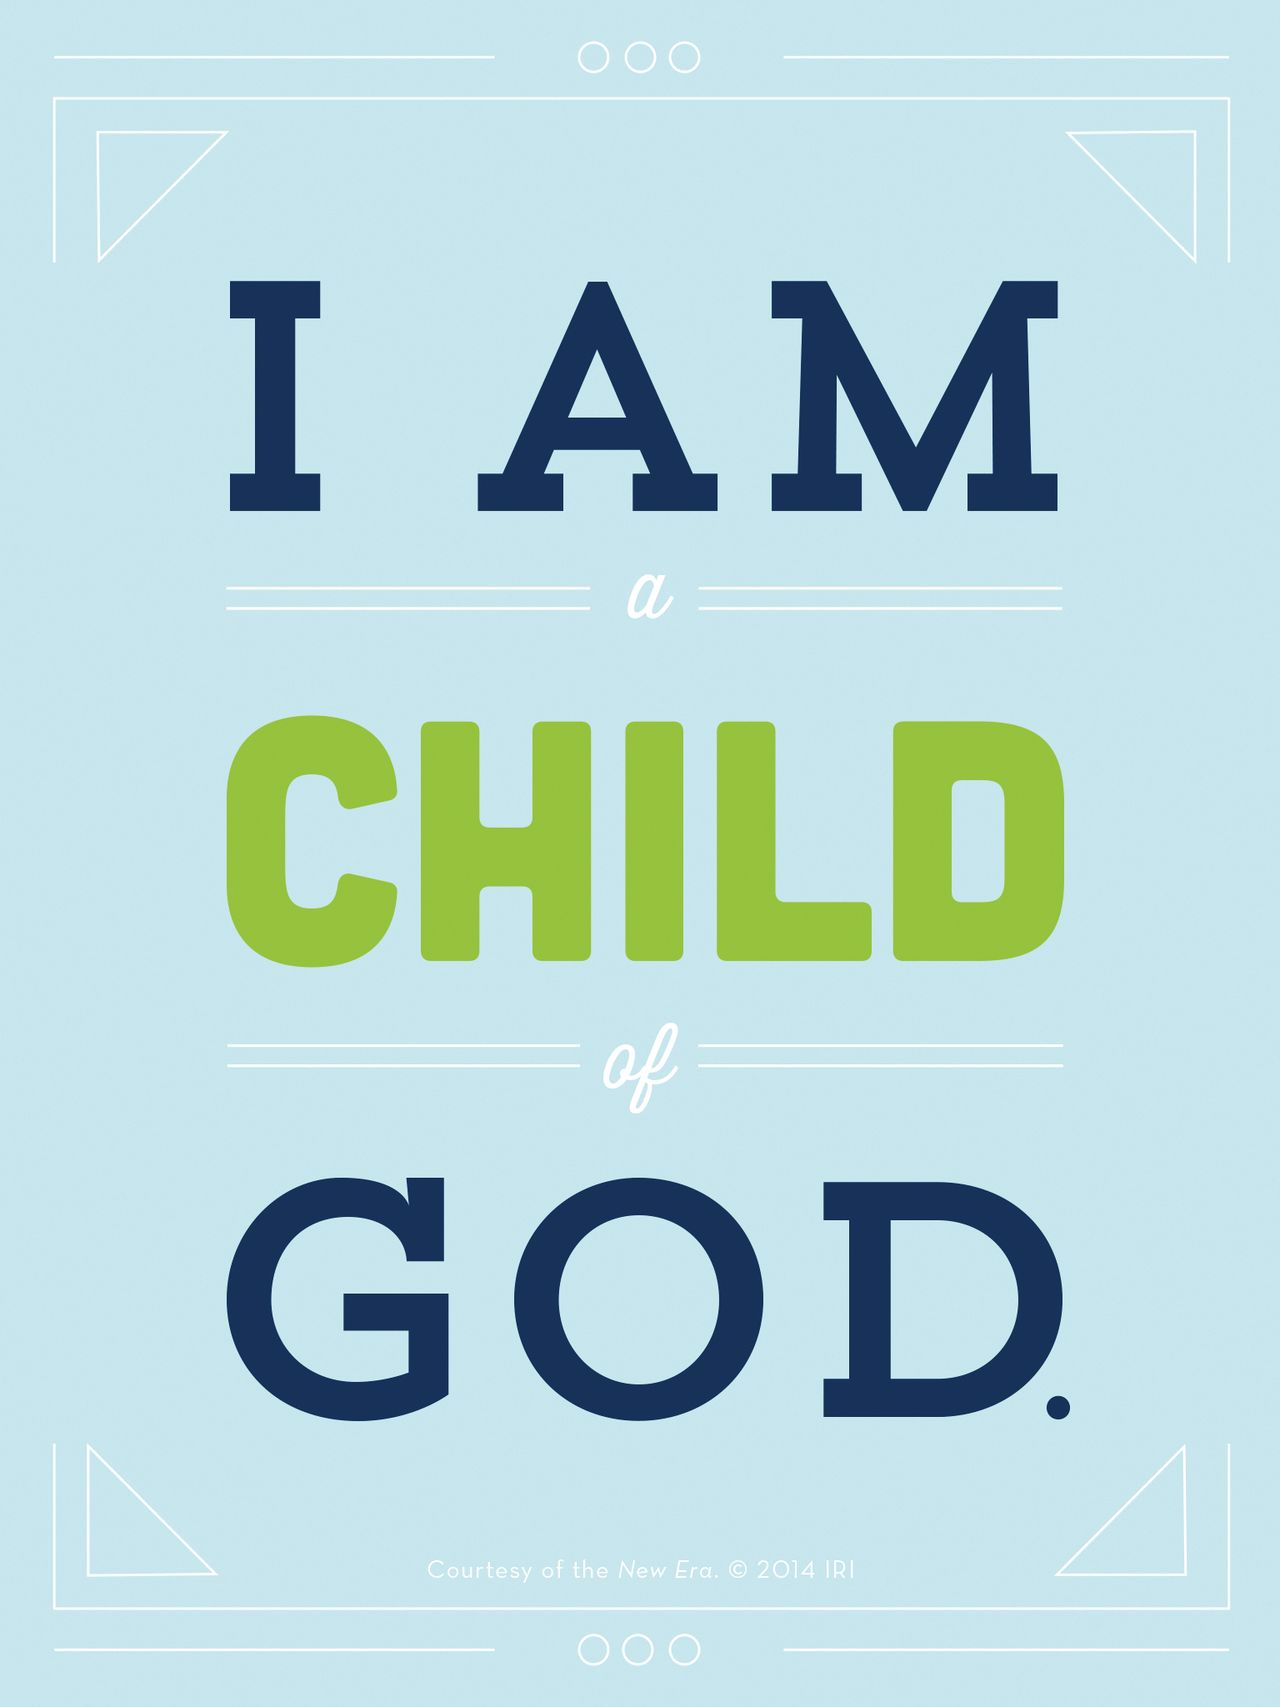 “I am a child of God.”—Hymns, no. 301, “I Am a Child of God.” Courtesy of the New Era, July 2014, “Outsmart Your Smartphone and Other Devices.”